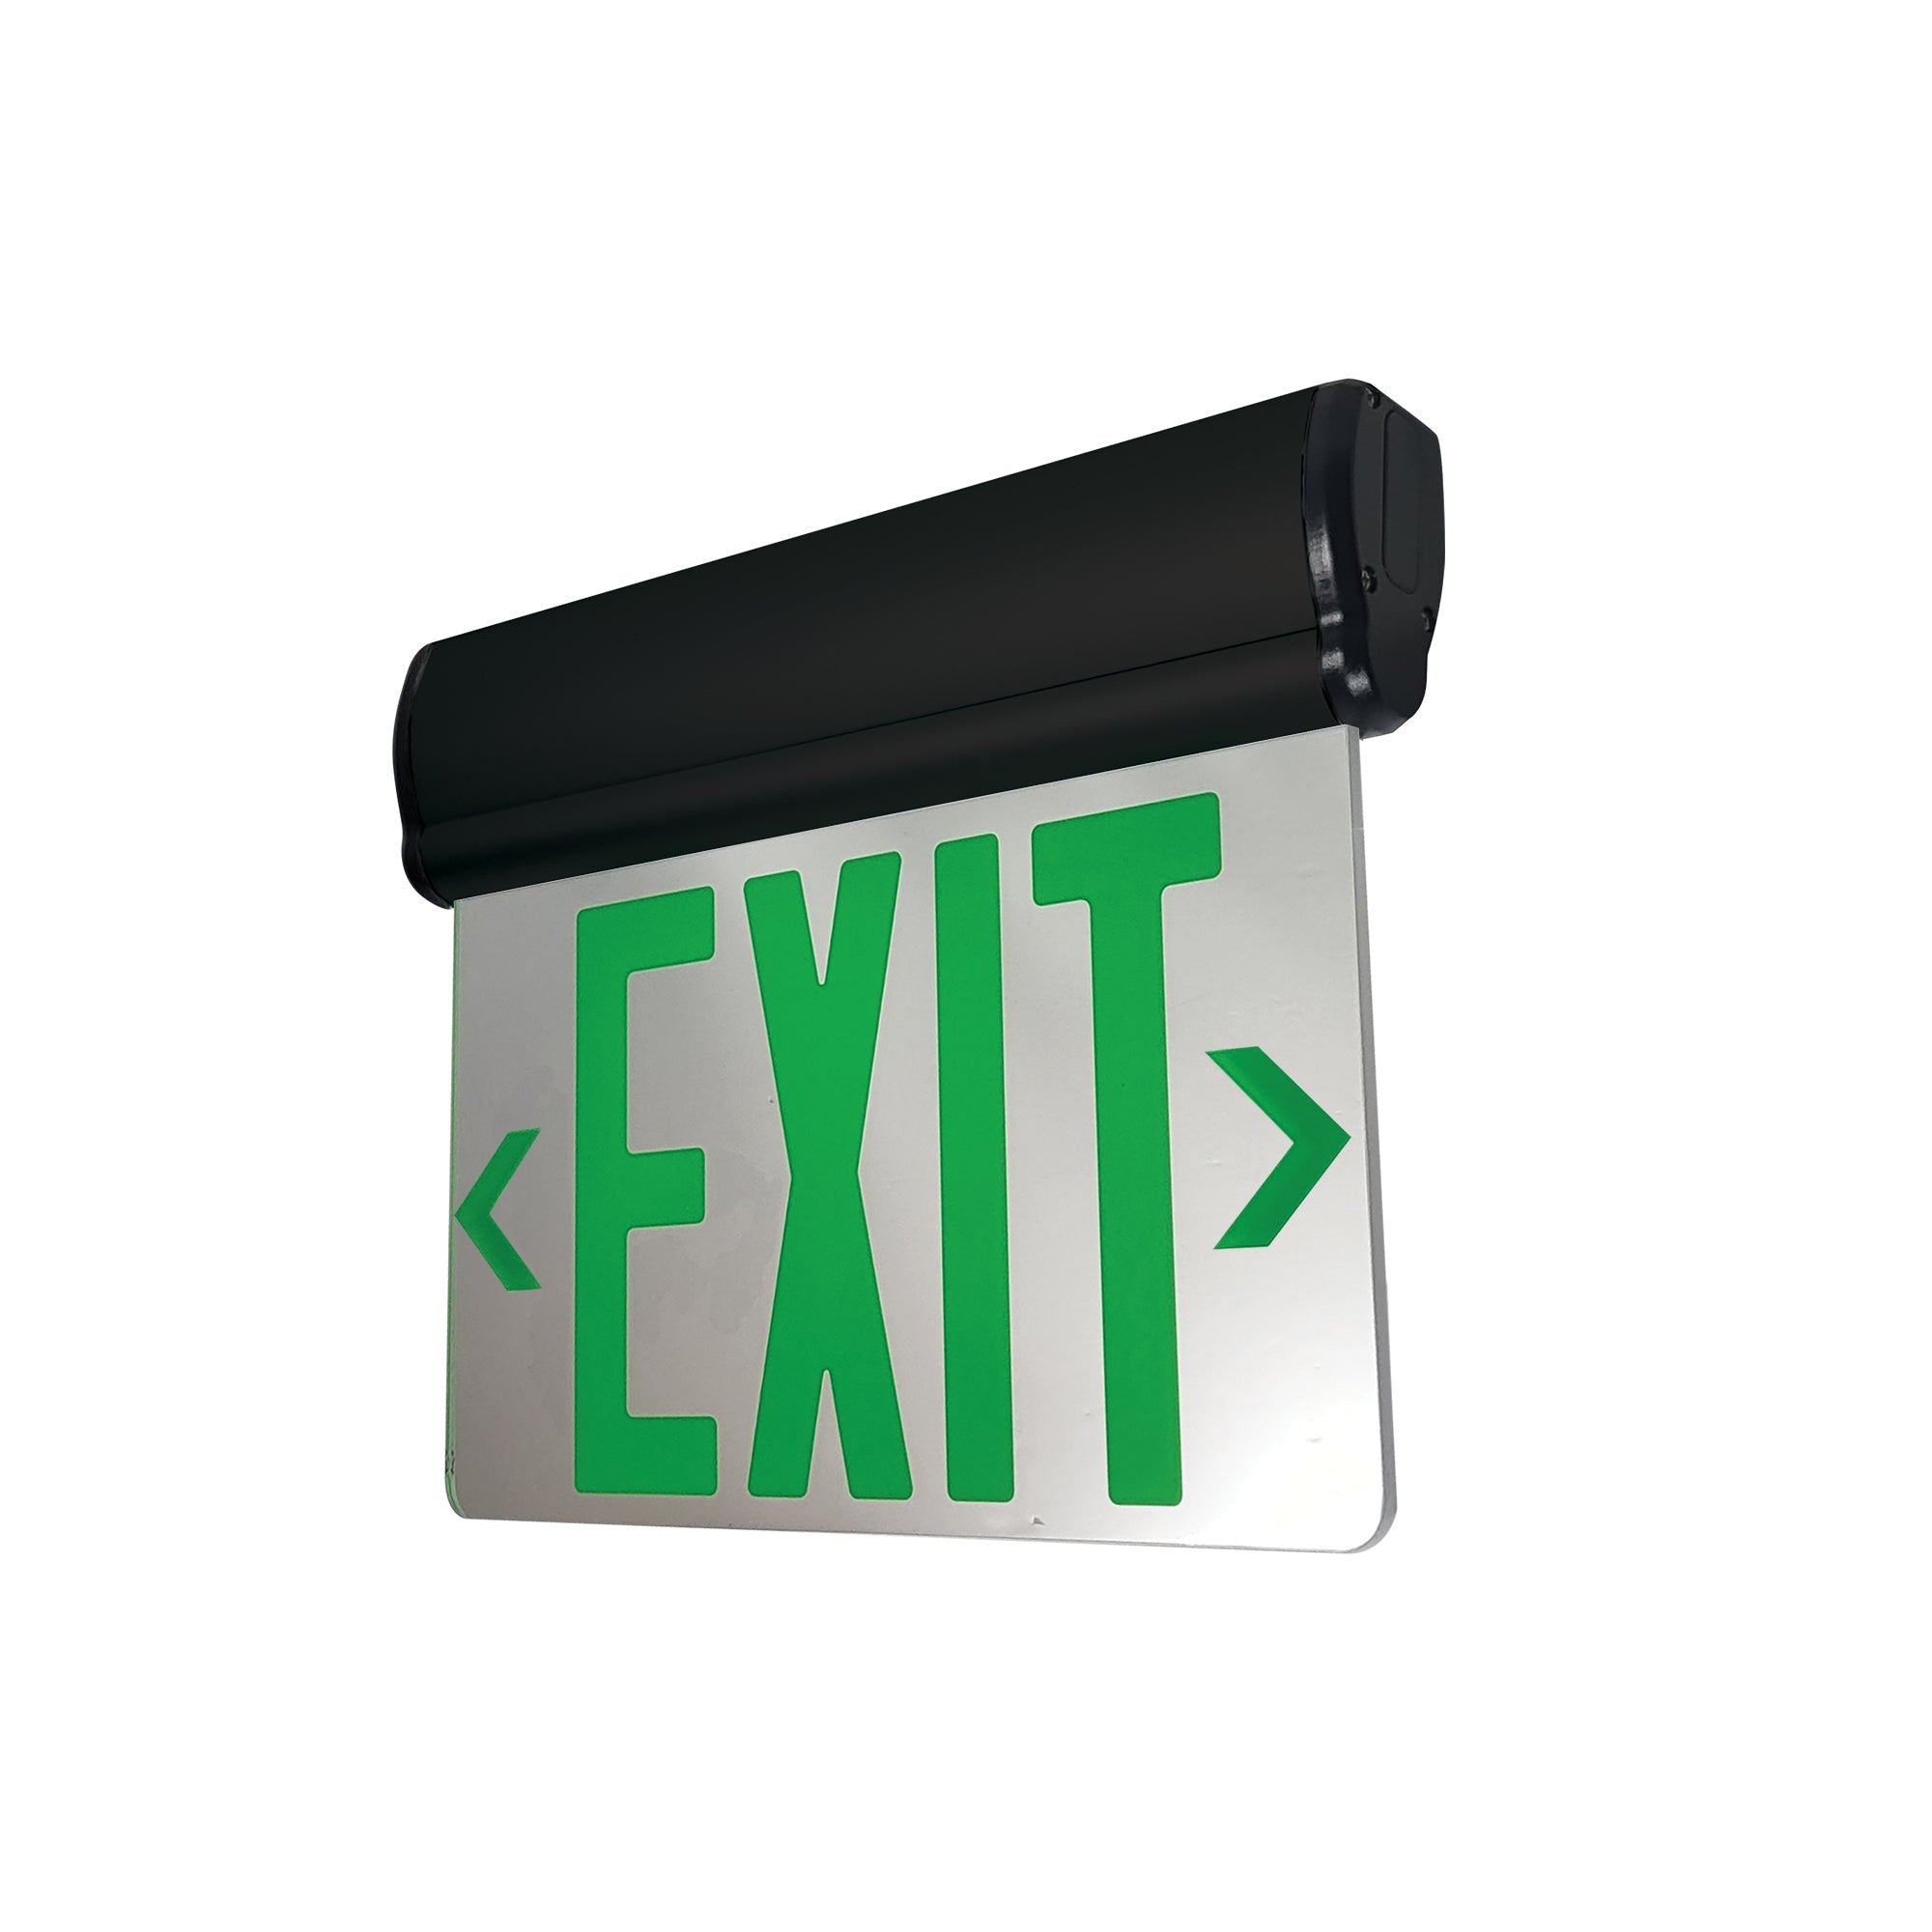 Nora Lighting NX-810-LEDGMB - Exit / Emergency - Surface Adjustable LED Edge-Lit Exit Sign, AC Only, 6 Inch Green Letters, Single Face / Mirrored Acrylic, Black Housing